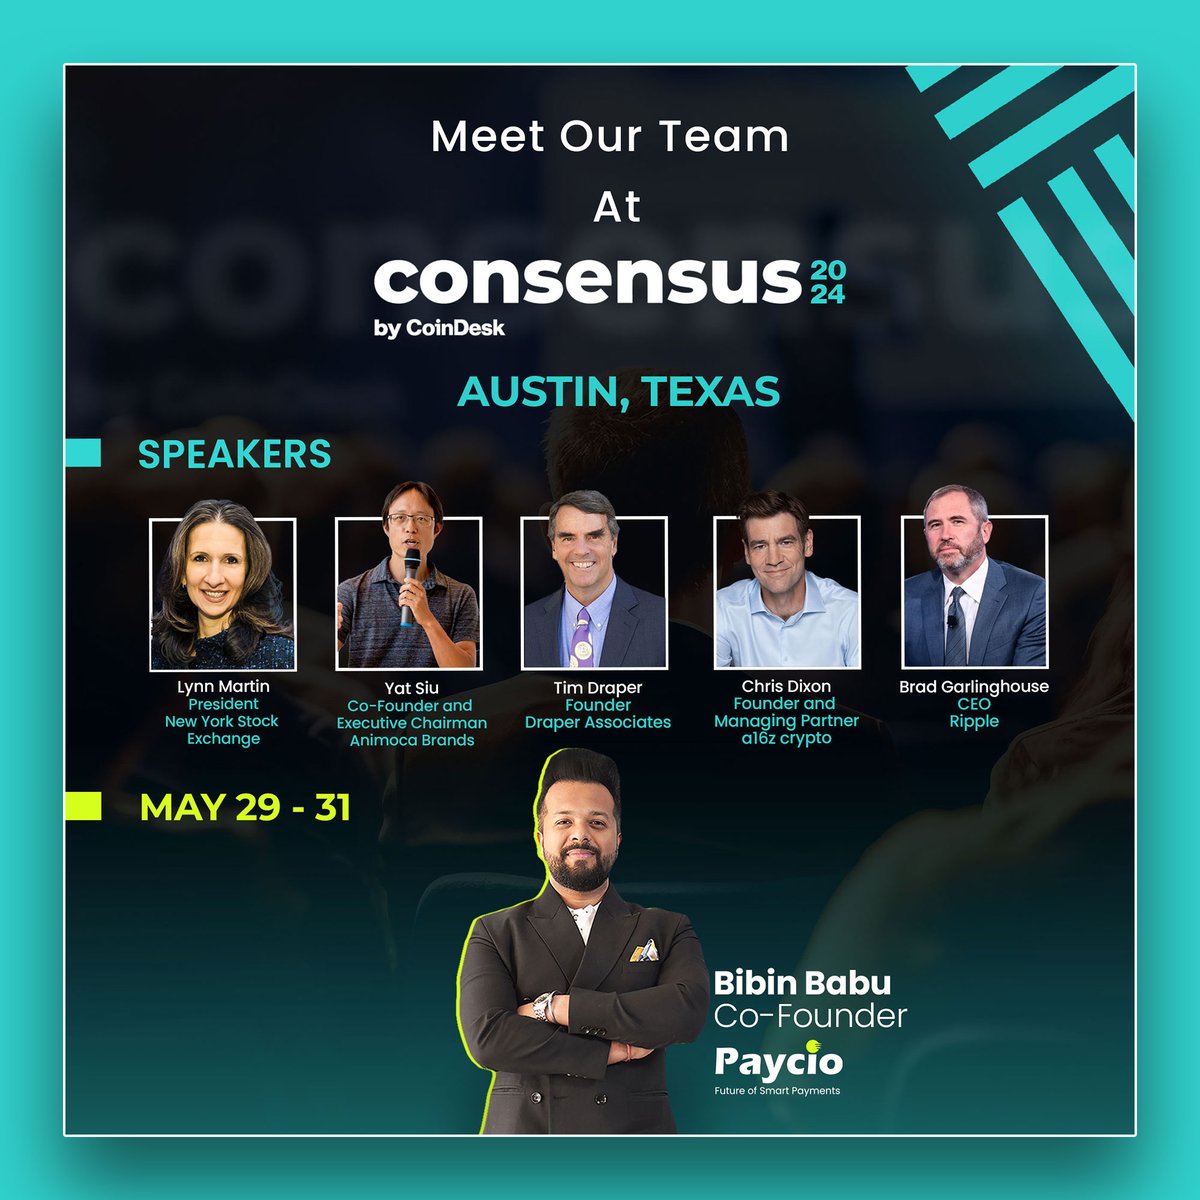 Catch us in Austin at #Consensus 2024 by #CoinDesk from 29-31 May. Join us along with Industry stalwarts such as Lynn Martin (New York Stock Exchange), Yat Siu (Animoca Brands), Tim Draper (Draper Associates), Chris Dixon (A16Z), Brad Garlinghouse (Ripple), and others at